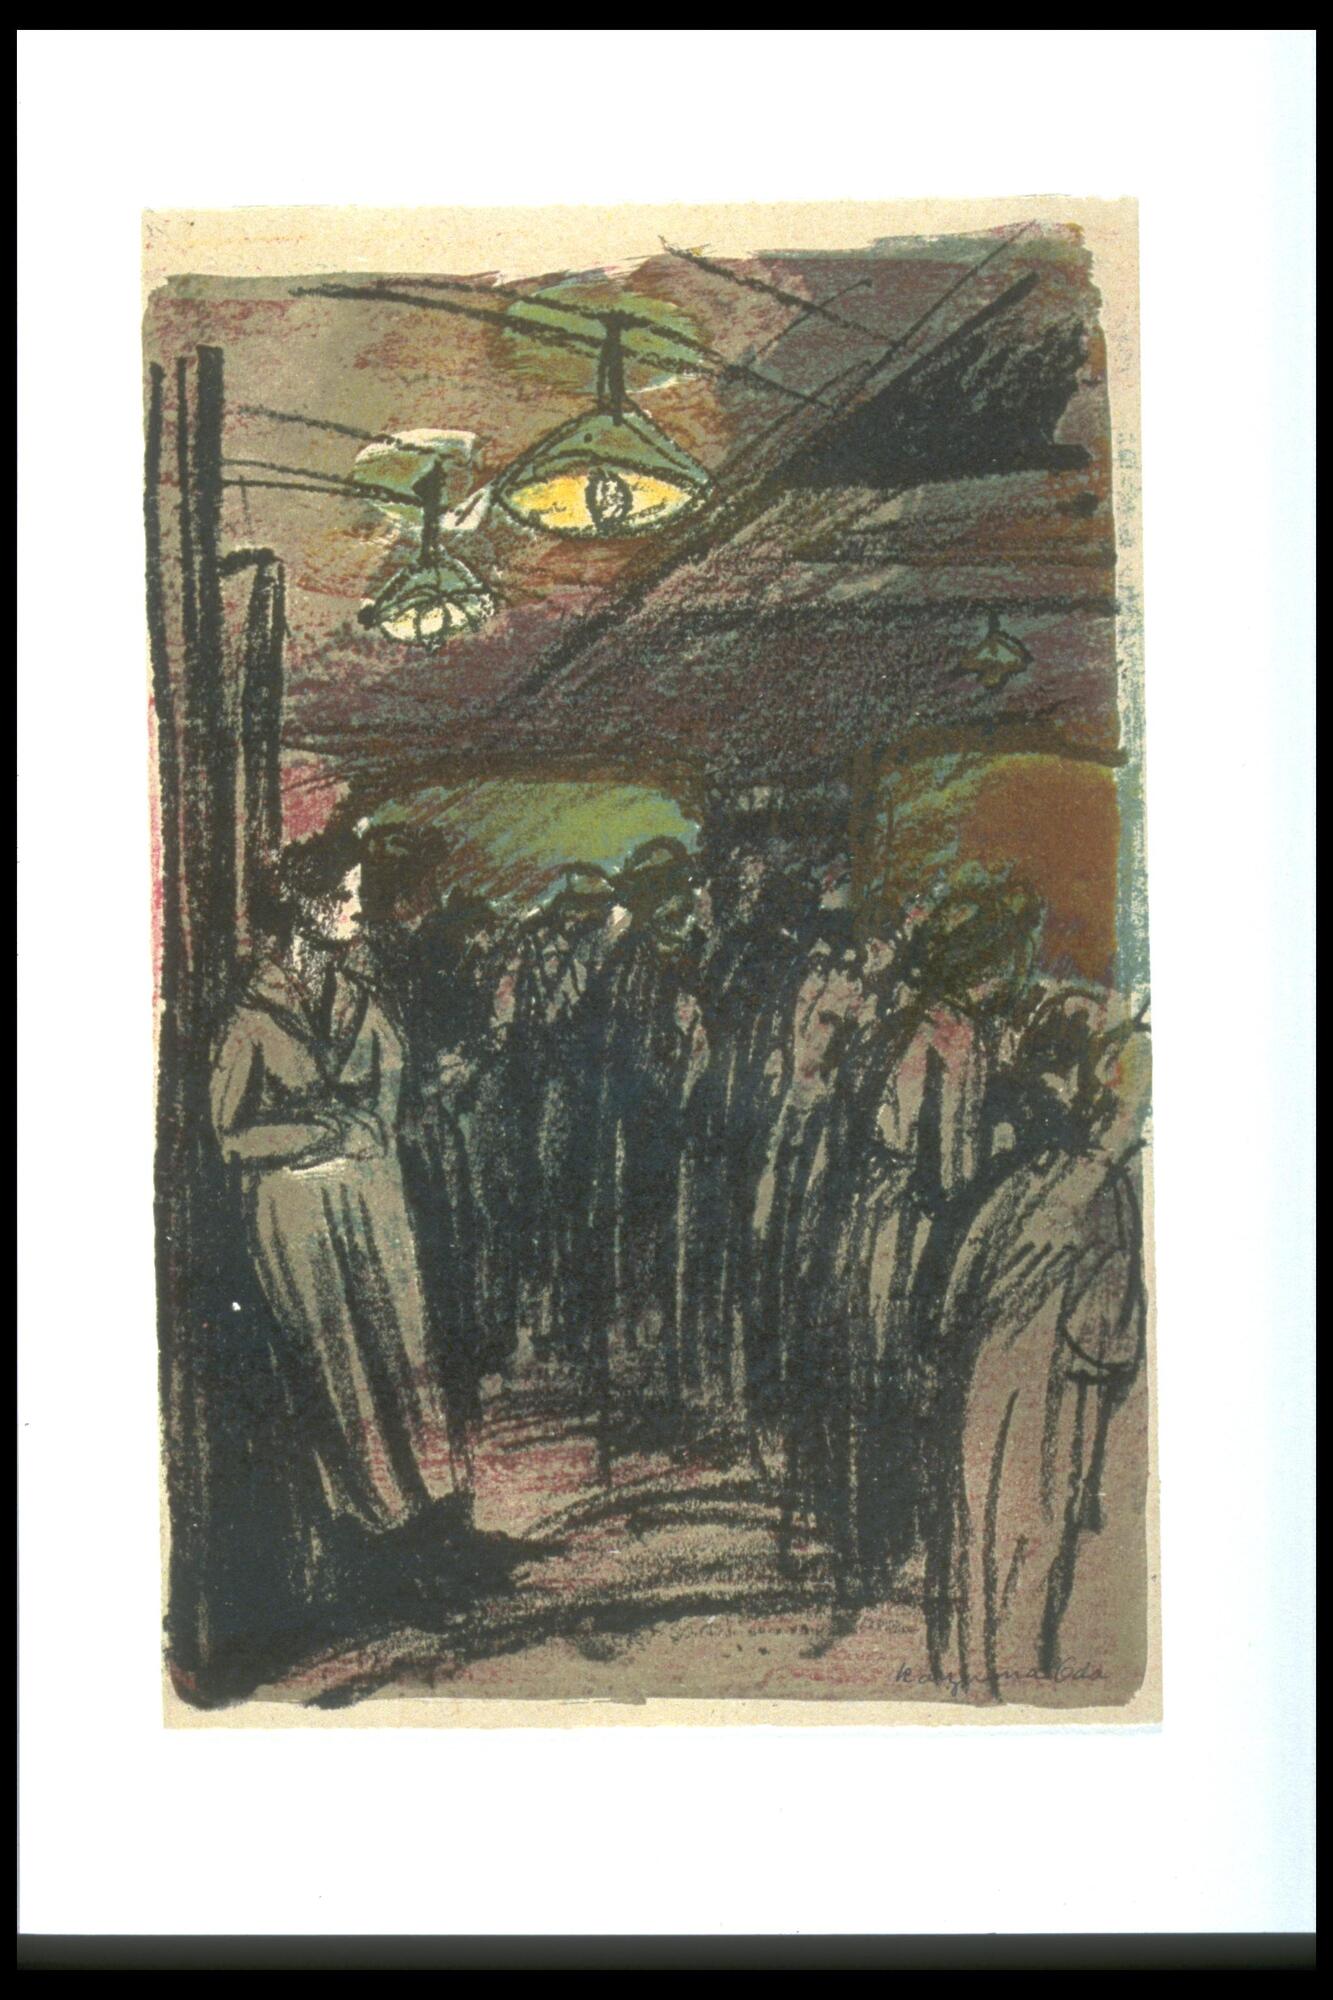 In thick, sketchy lines, this print portrays a scene in which one figure leans against a wall on the left, and a crowd of people look over a balcony on the right. The top half of the composition is taken up mostly by a ceiling with two lamps with bare bulbs hanging from it.